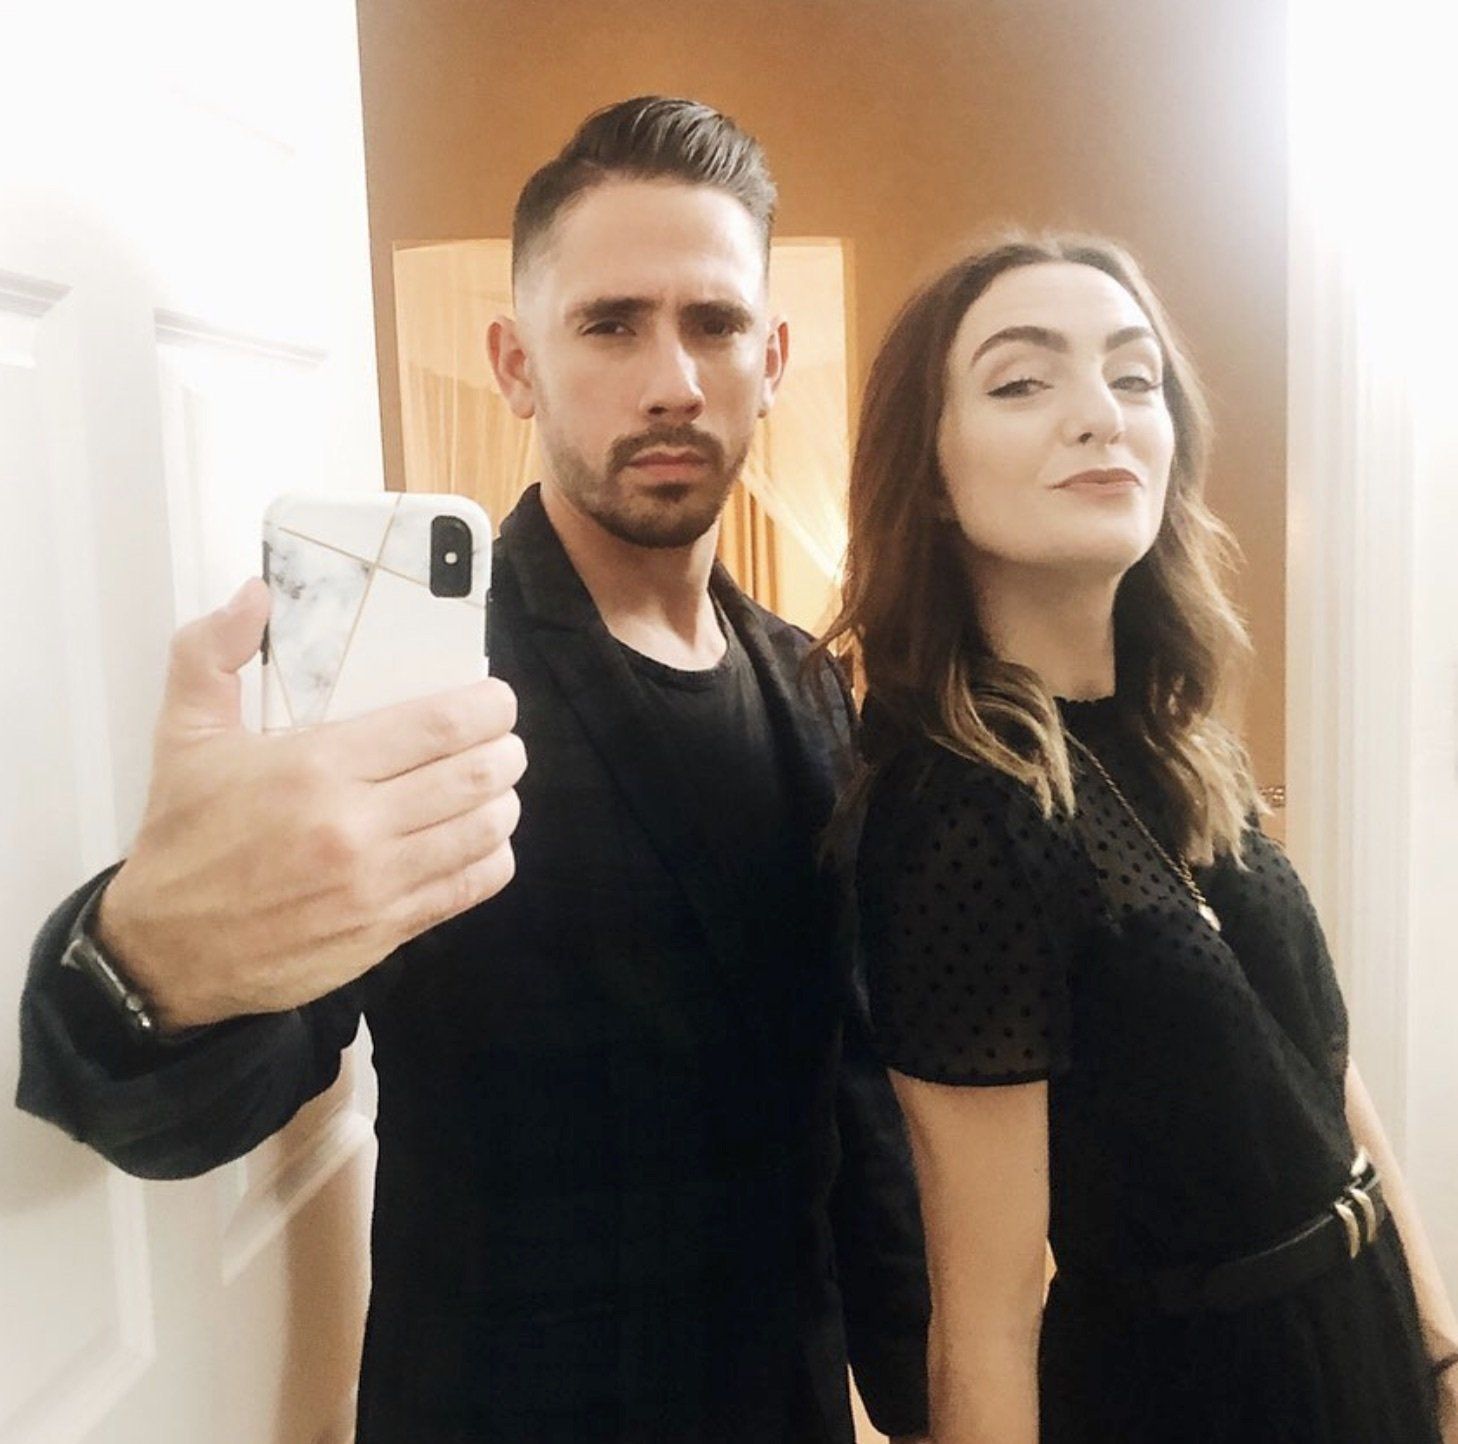 Gabriel and Debbie Mayes take a selfie with their iPhone to support their Instagram niche.